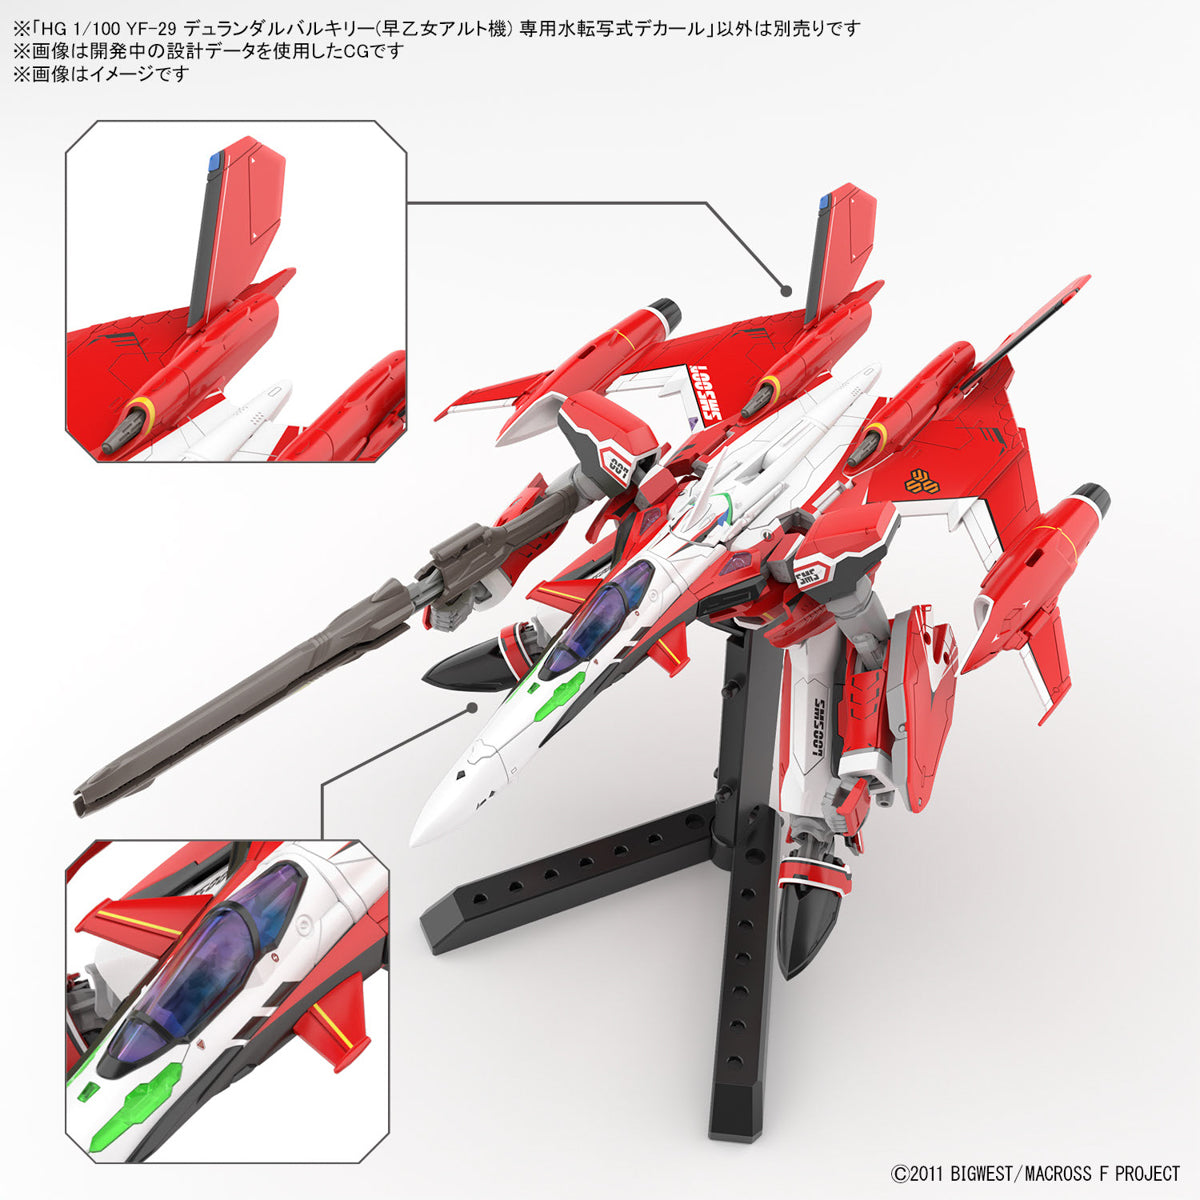 HG 1/100 YF-29 Durandal Valkyrie (Alto Saotome Machine) Exclusive water slide decal